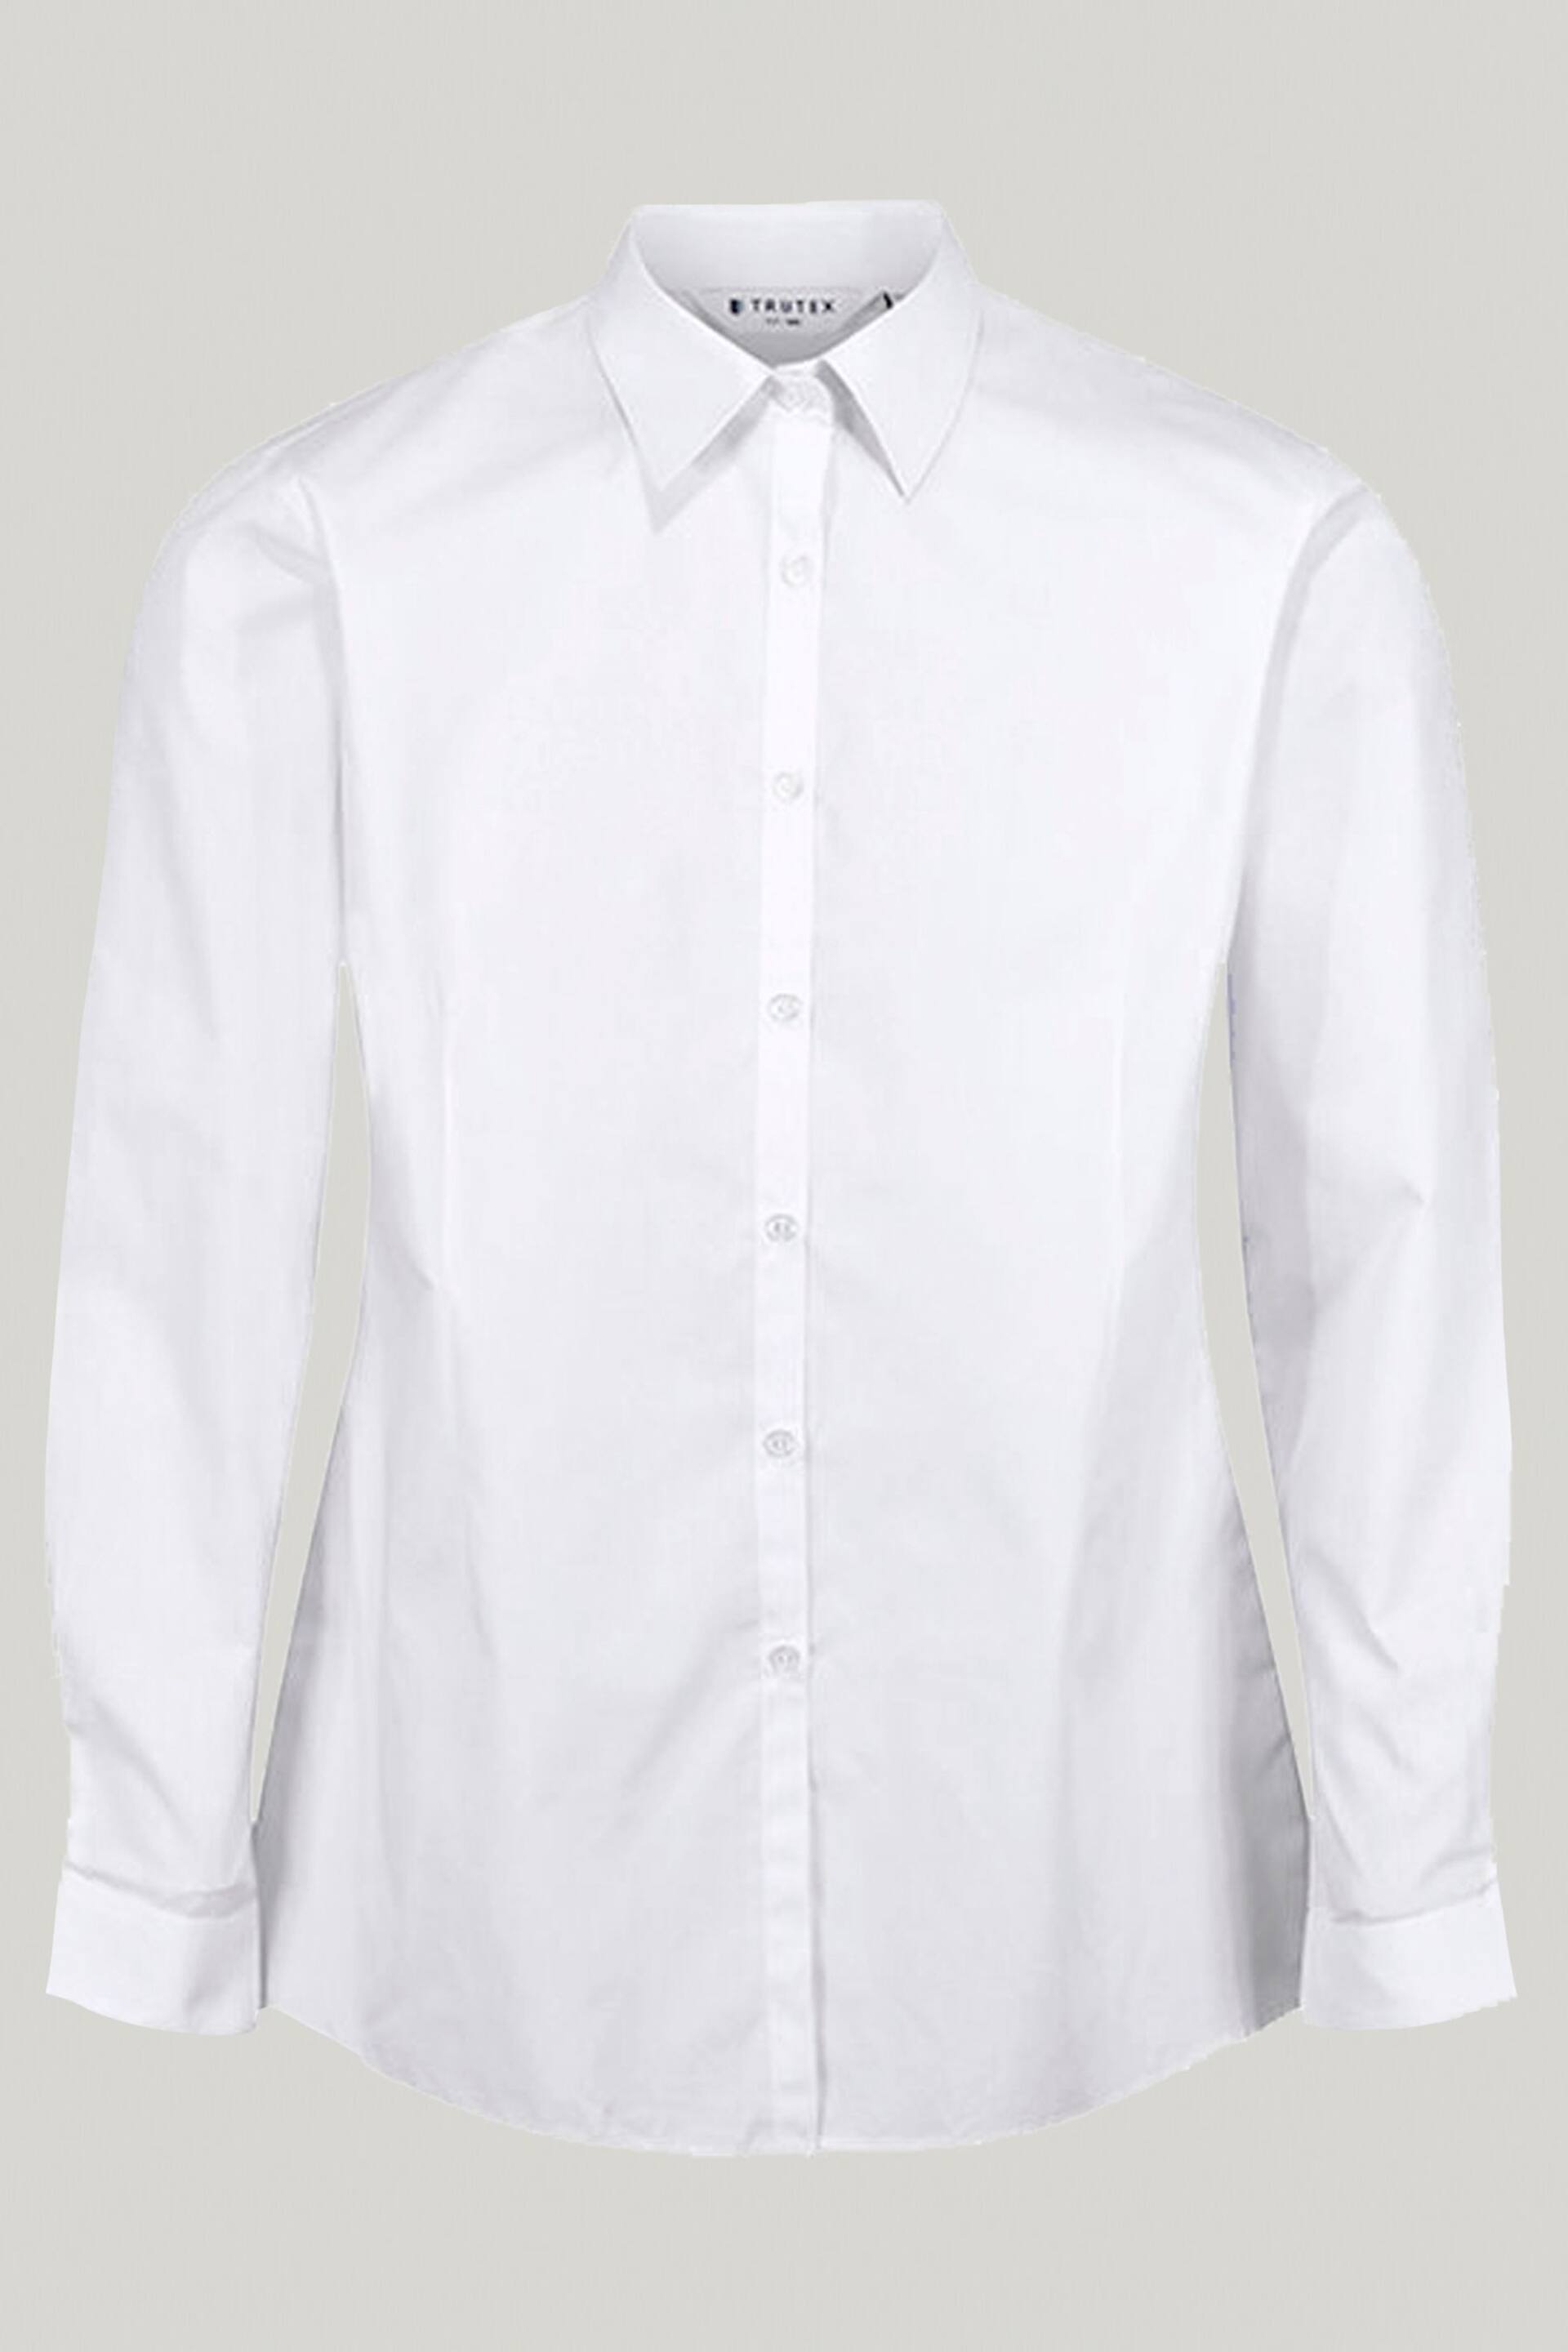 Trutex White Regular Fit Long Sleeve 3 Pack School Shirts - Image 6 of 7